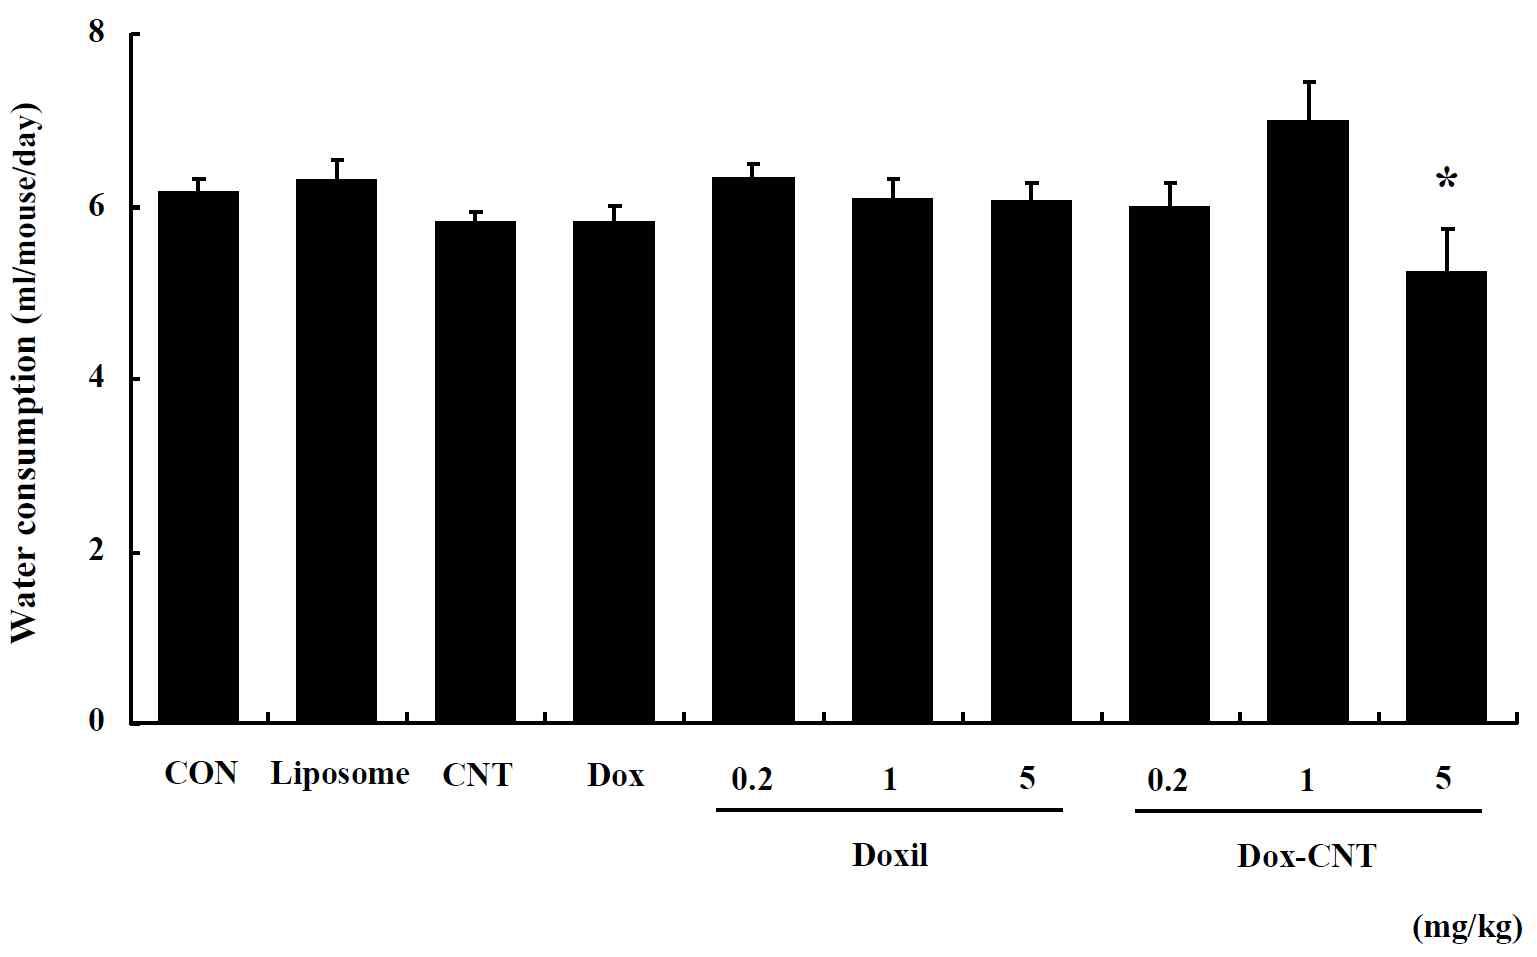 The change of water consumption in male ICR mice for 14 days after single exposure. Mice were respectively administered by intravenous injection with liposome, CNT, Dox, Doxil (0.2, 1, 5 mg/kg) and Dox-CNT (0.2, 1, 5 mg/kg). The results are presented as mean ± SE (n = 10). * p < 0.05, significantly different from the control.